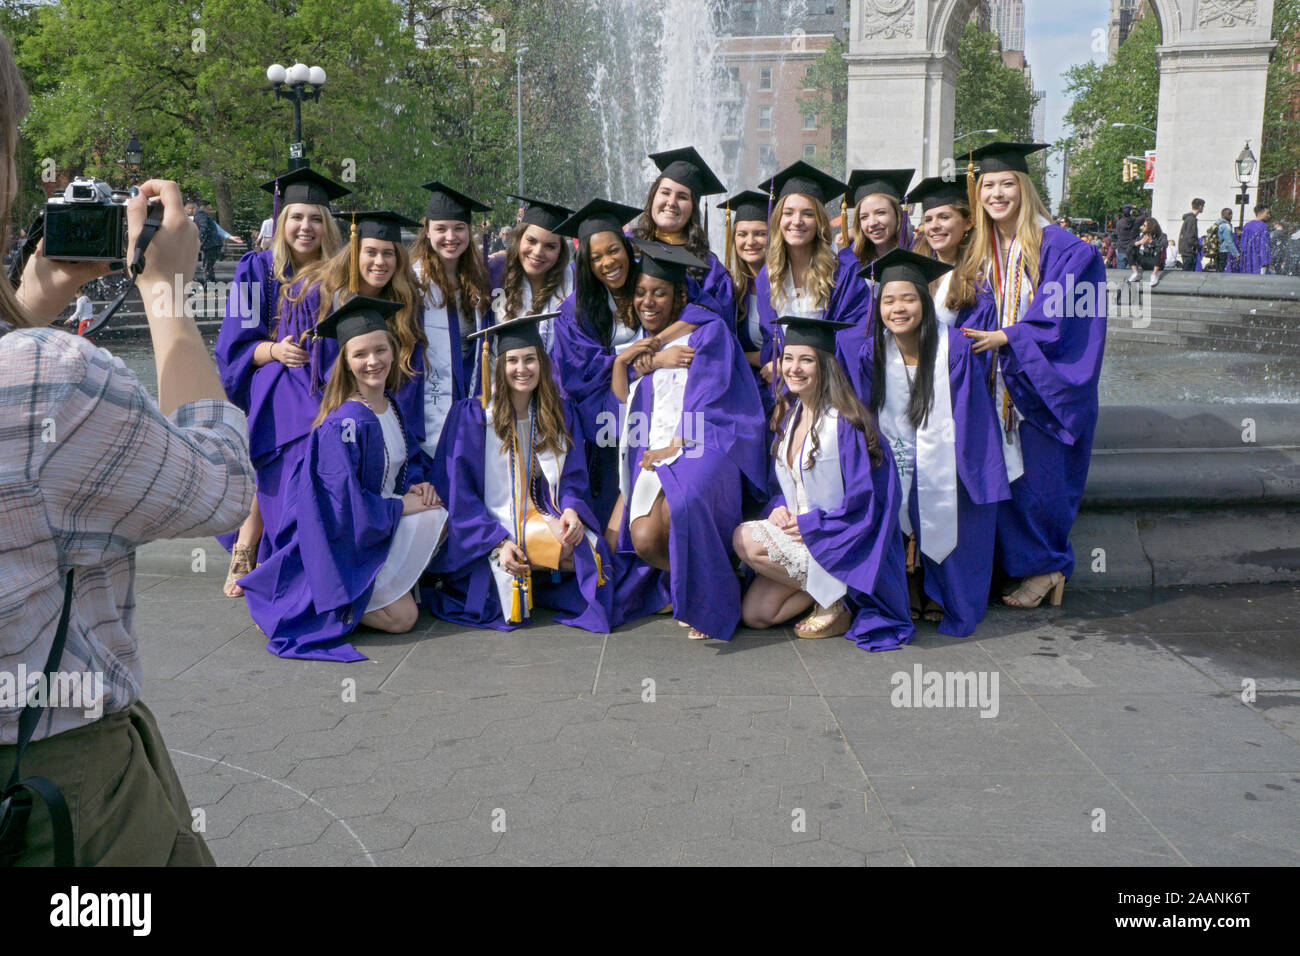 A diverse group of women pose for a photo in their graduation caps & gowns in front of the fountain in Washington Square Park in Greenwich Village, NY Stock Photo